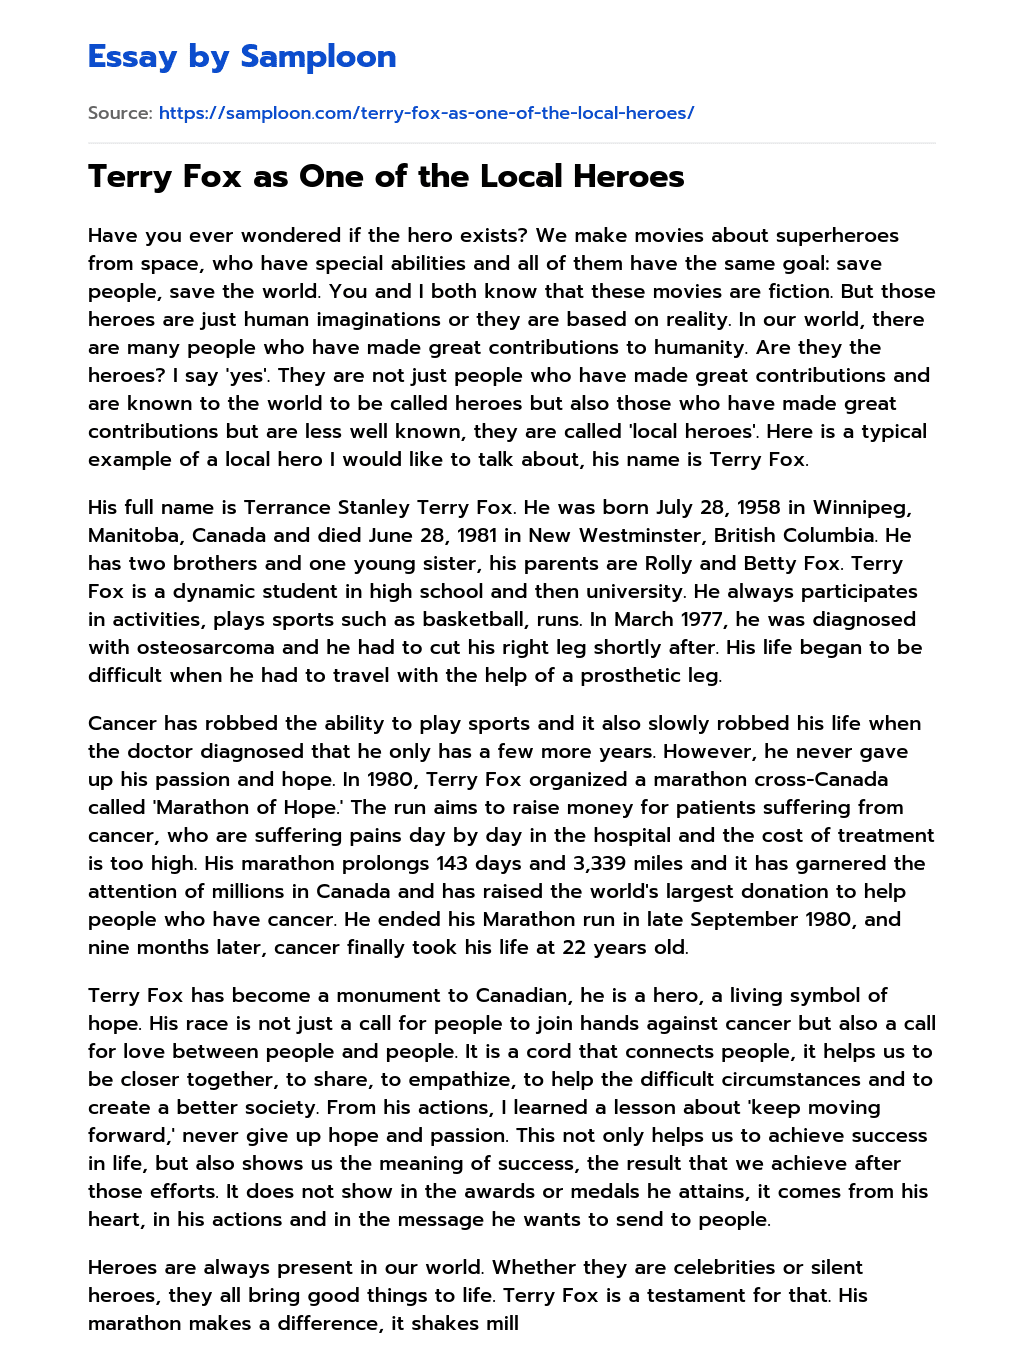 Terry Fox as One of the Local Heroes Personal Essay essay